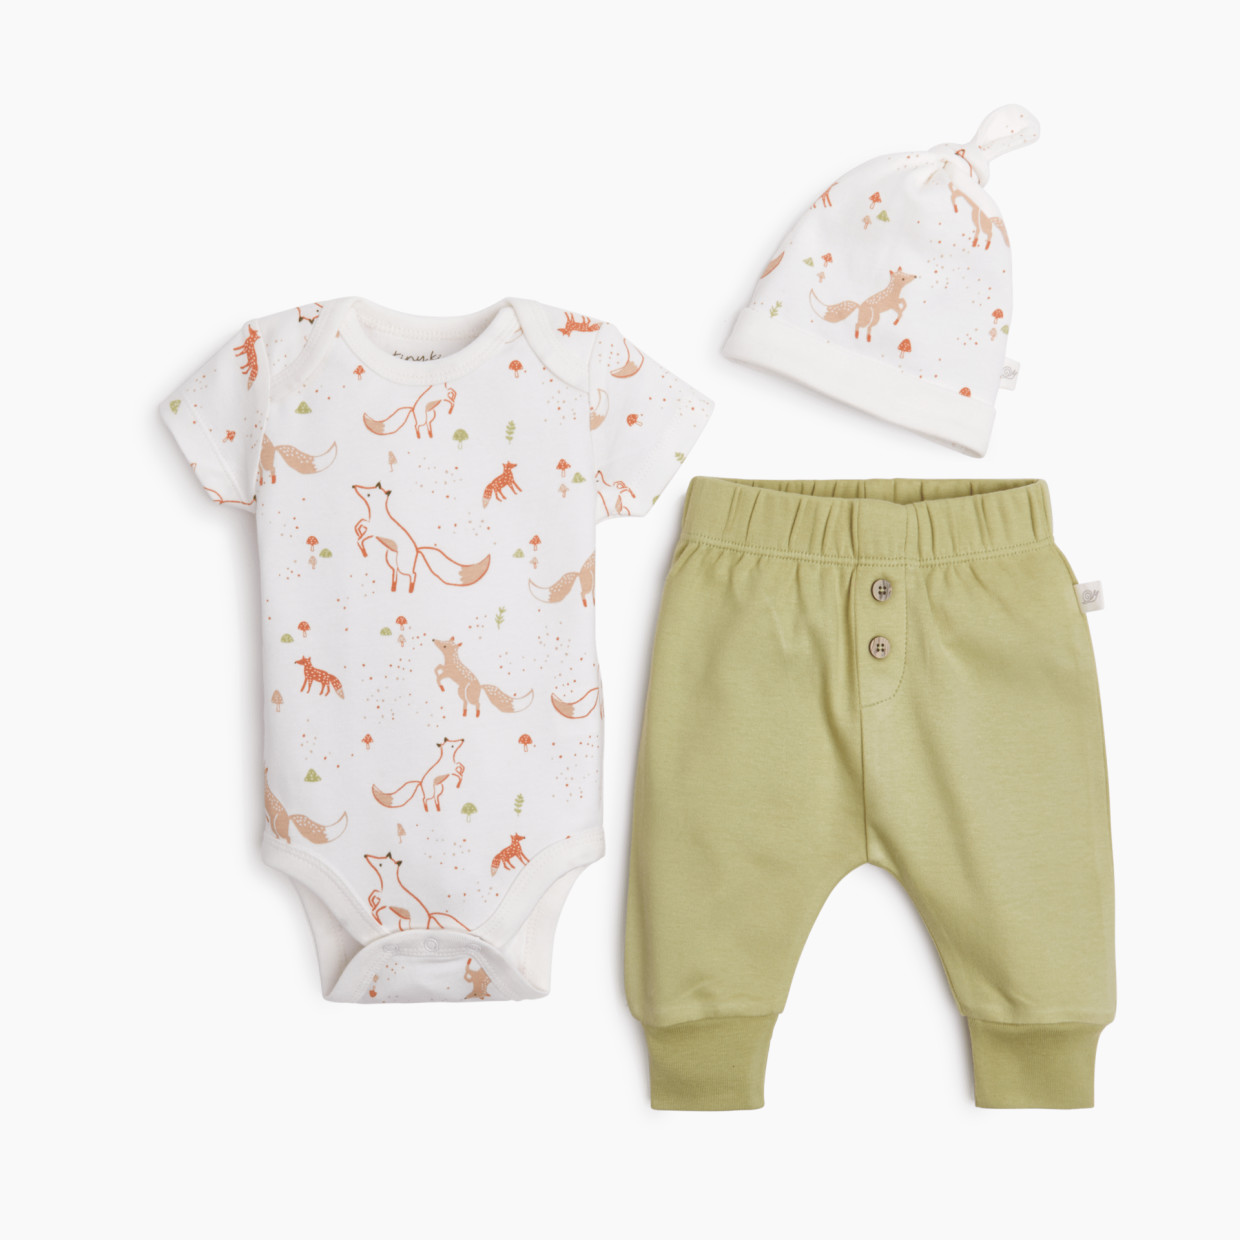 Tiny Kind The Outfit 3 Piece Set - Baby Fox, 3-6 M.